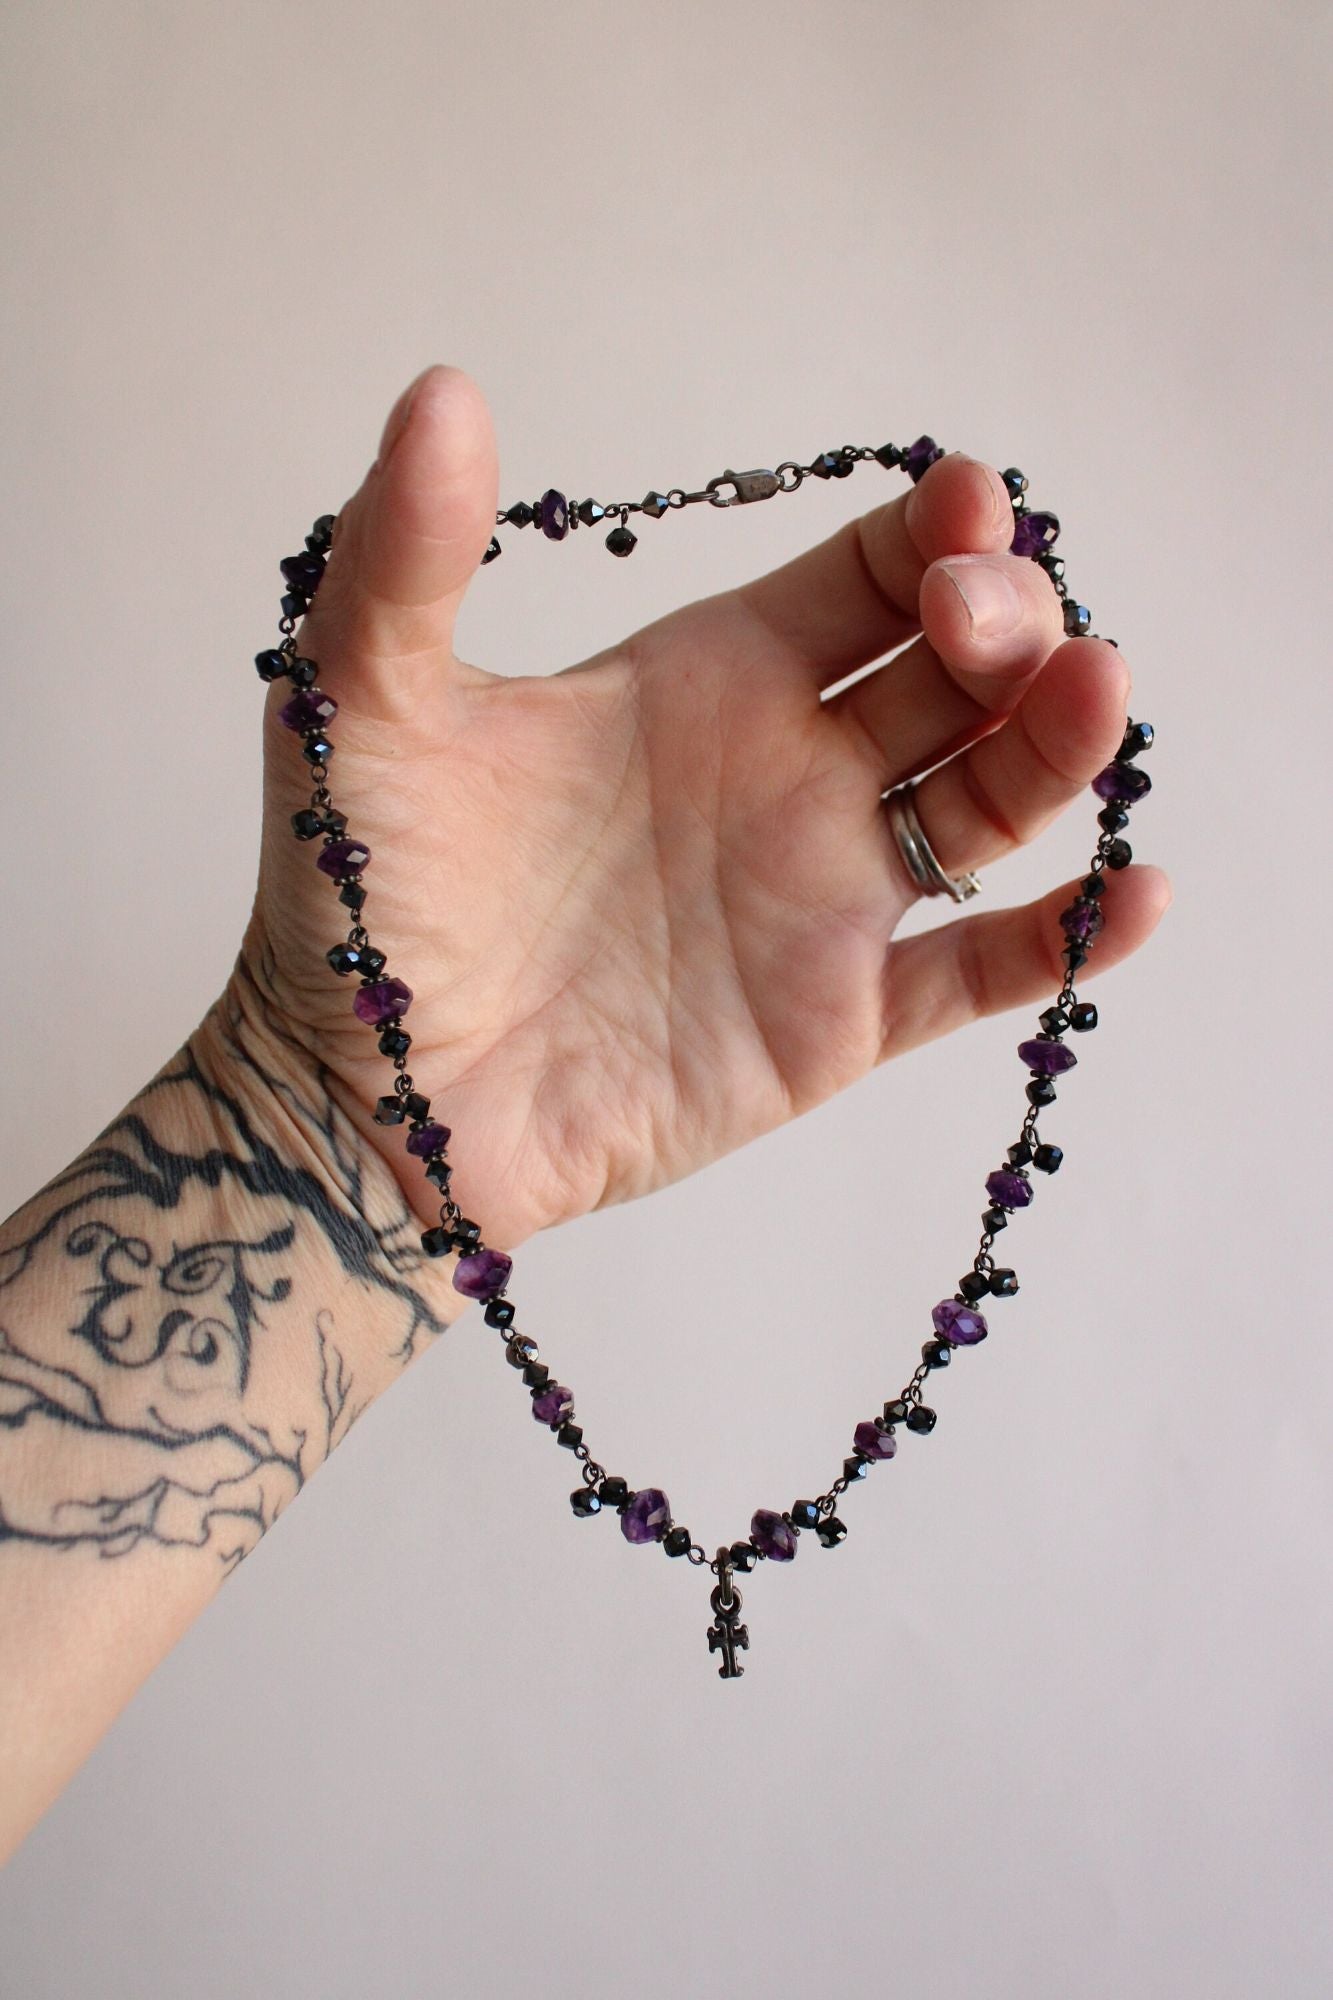 Vintage 1990s Choker with Purple and Black Beads and Small Cross Pendant